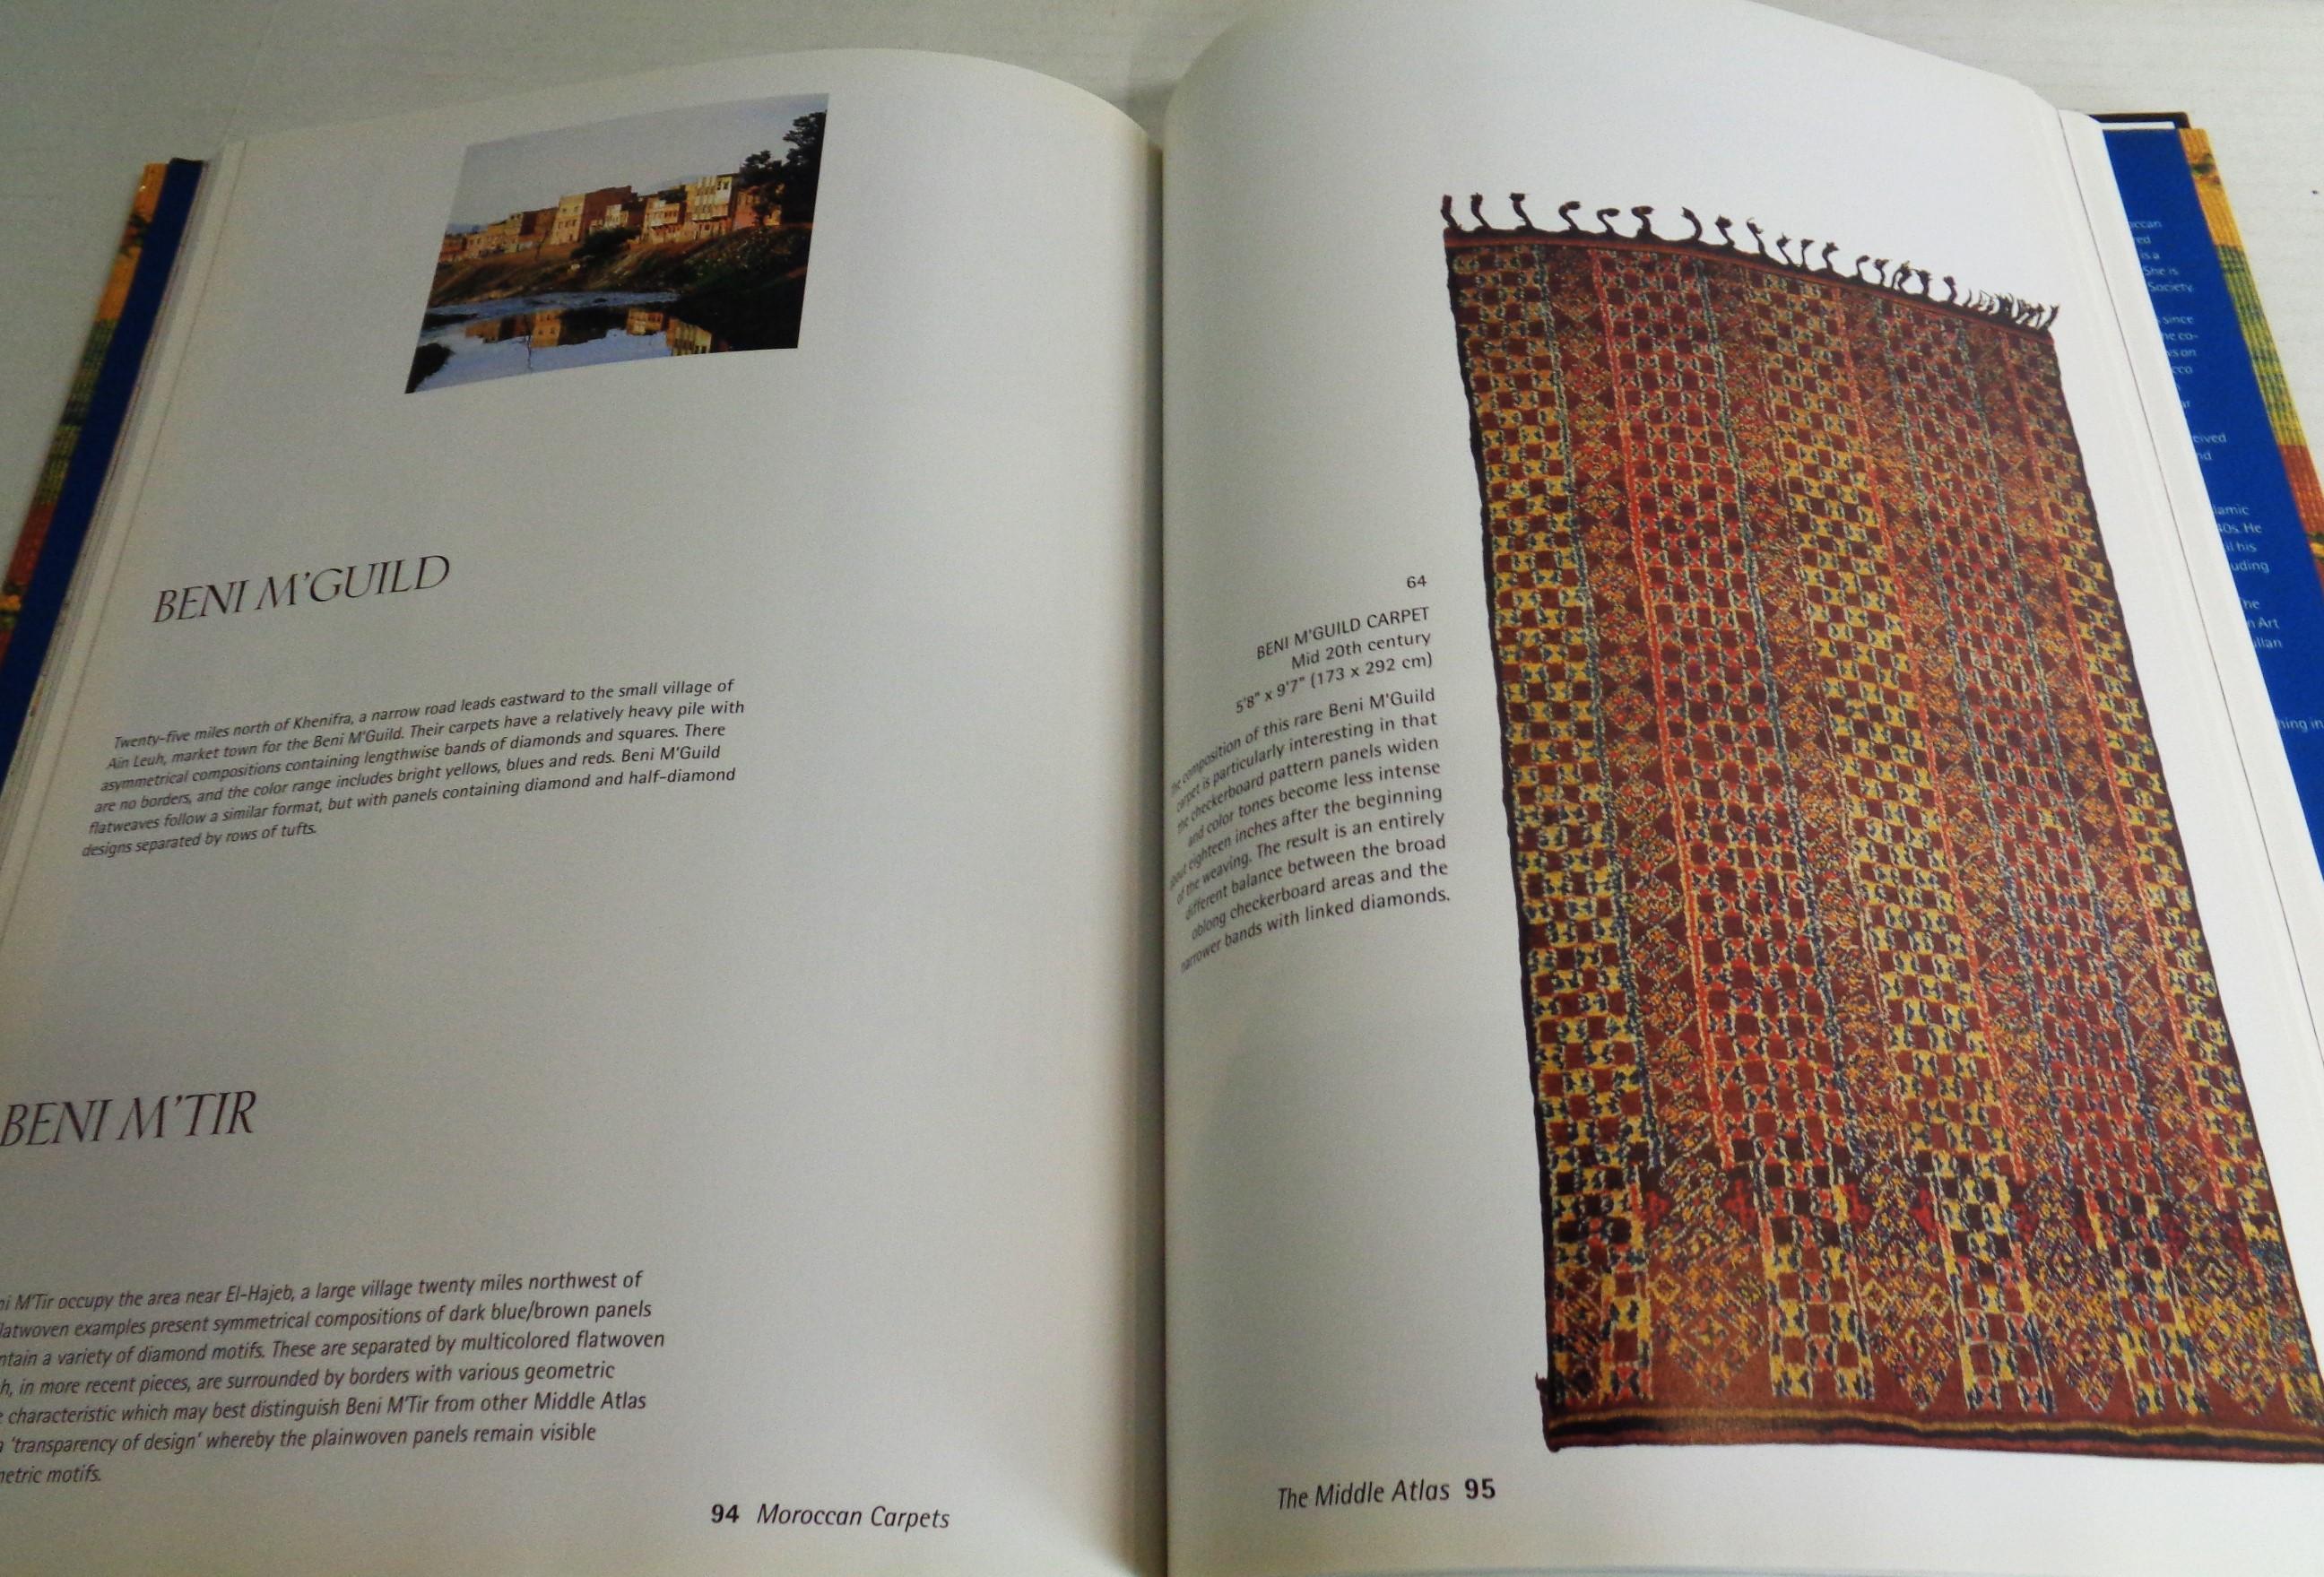  Moroccan Carpets: Pickering, Pickering, Yohe - Laurence King Hali Publications For Sale 11